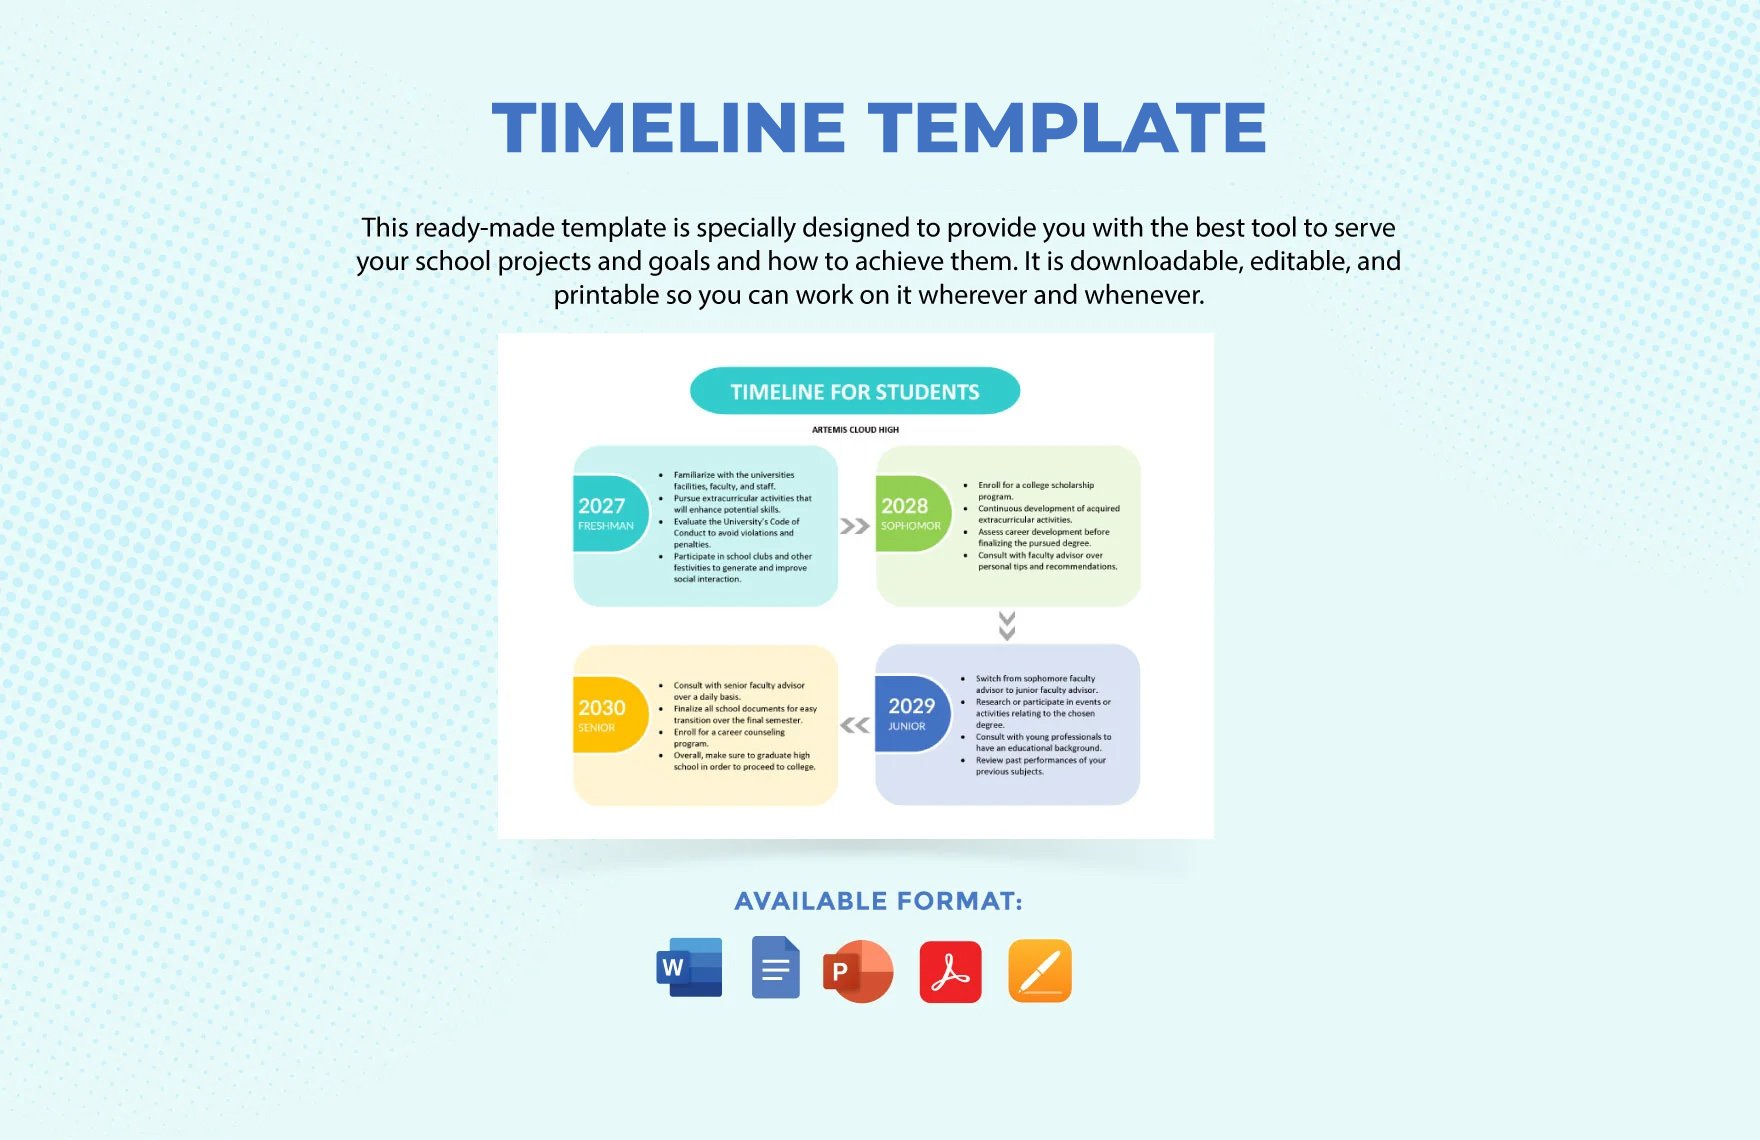 Timeline Template For Students in Word, Google Docs, PDF, Apple Pages, PowerPoint